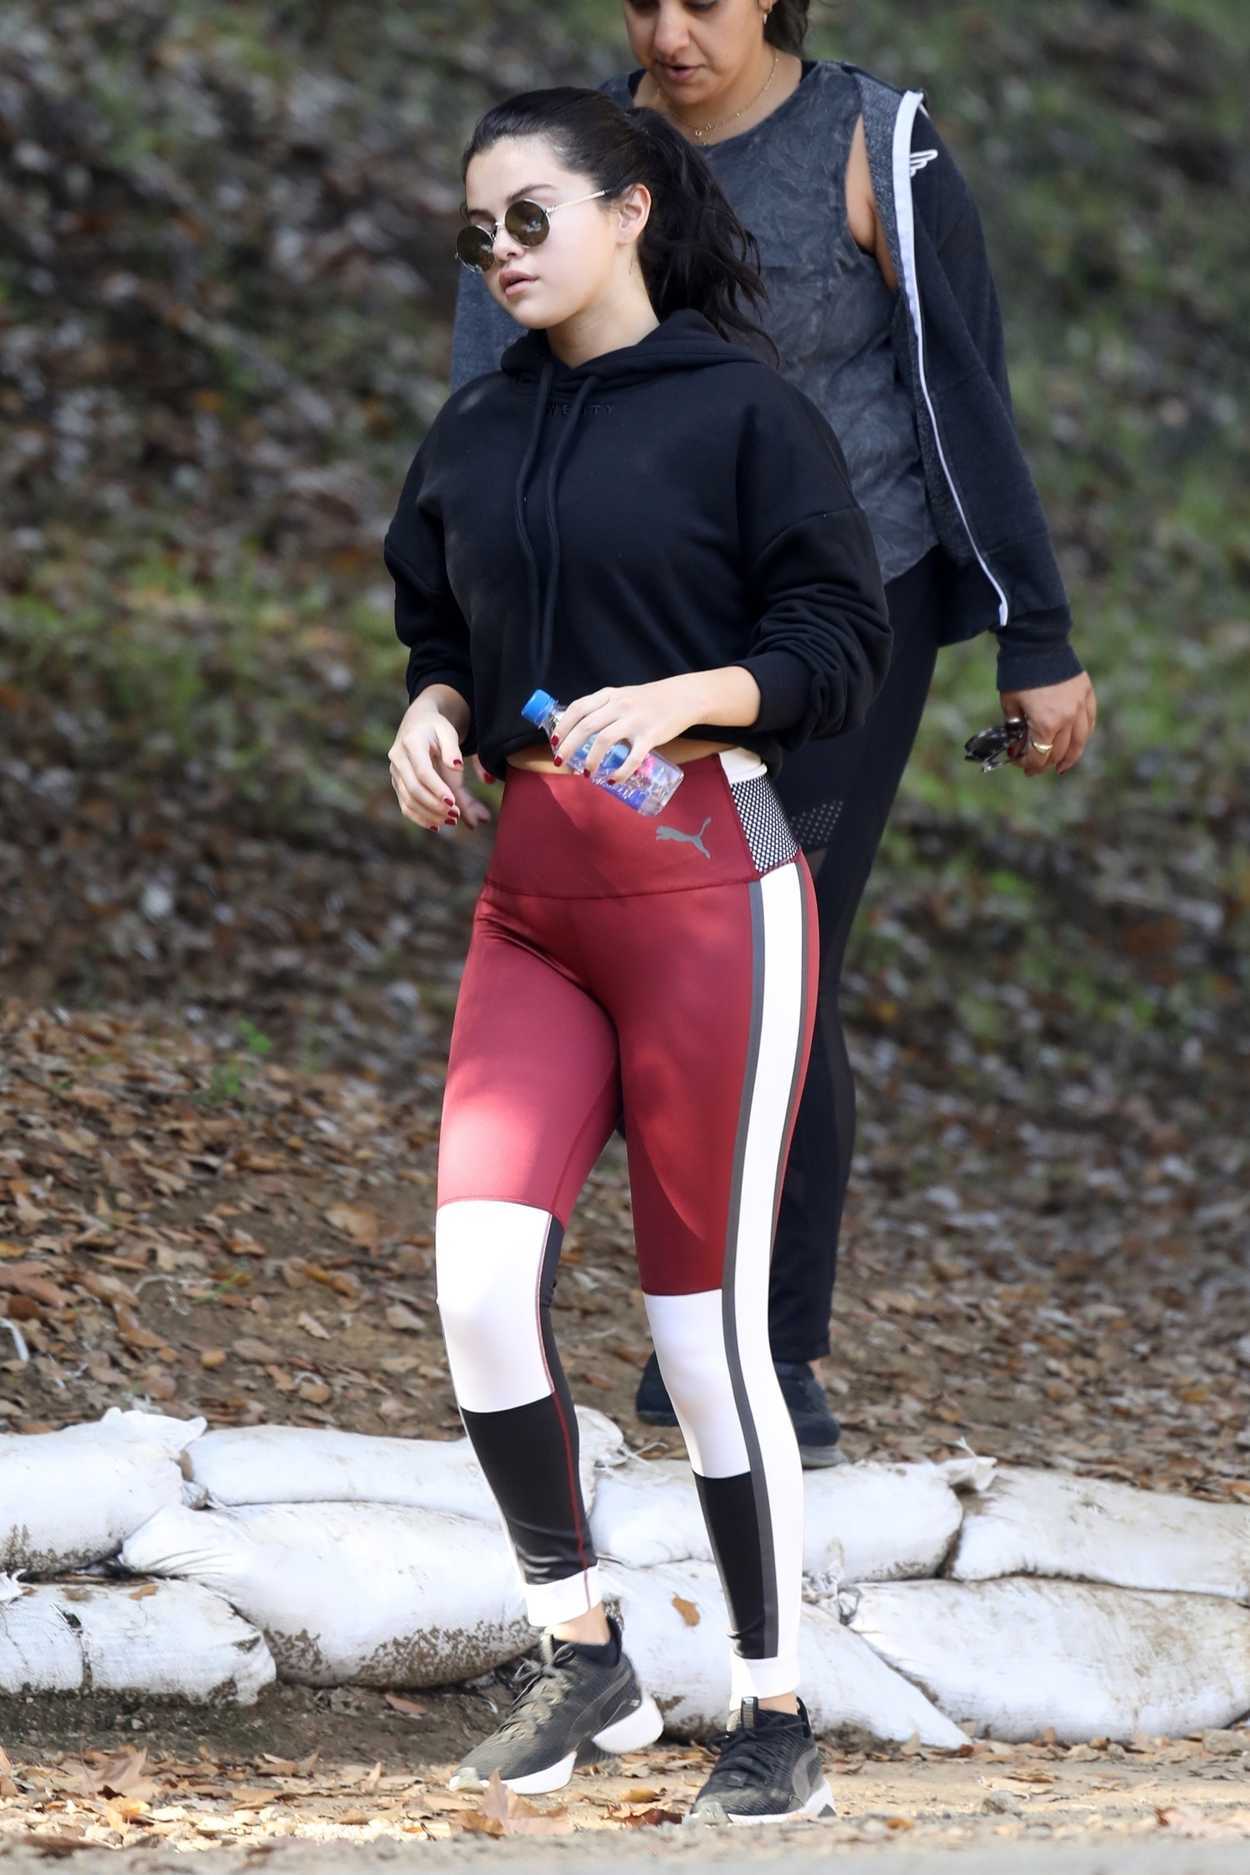 Selena Gomez in a Puma Leggings Out for a Hike in Los Angeles 12/22